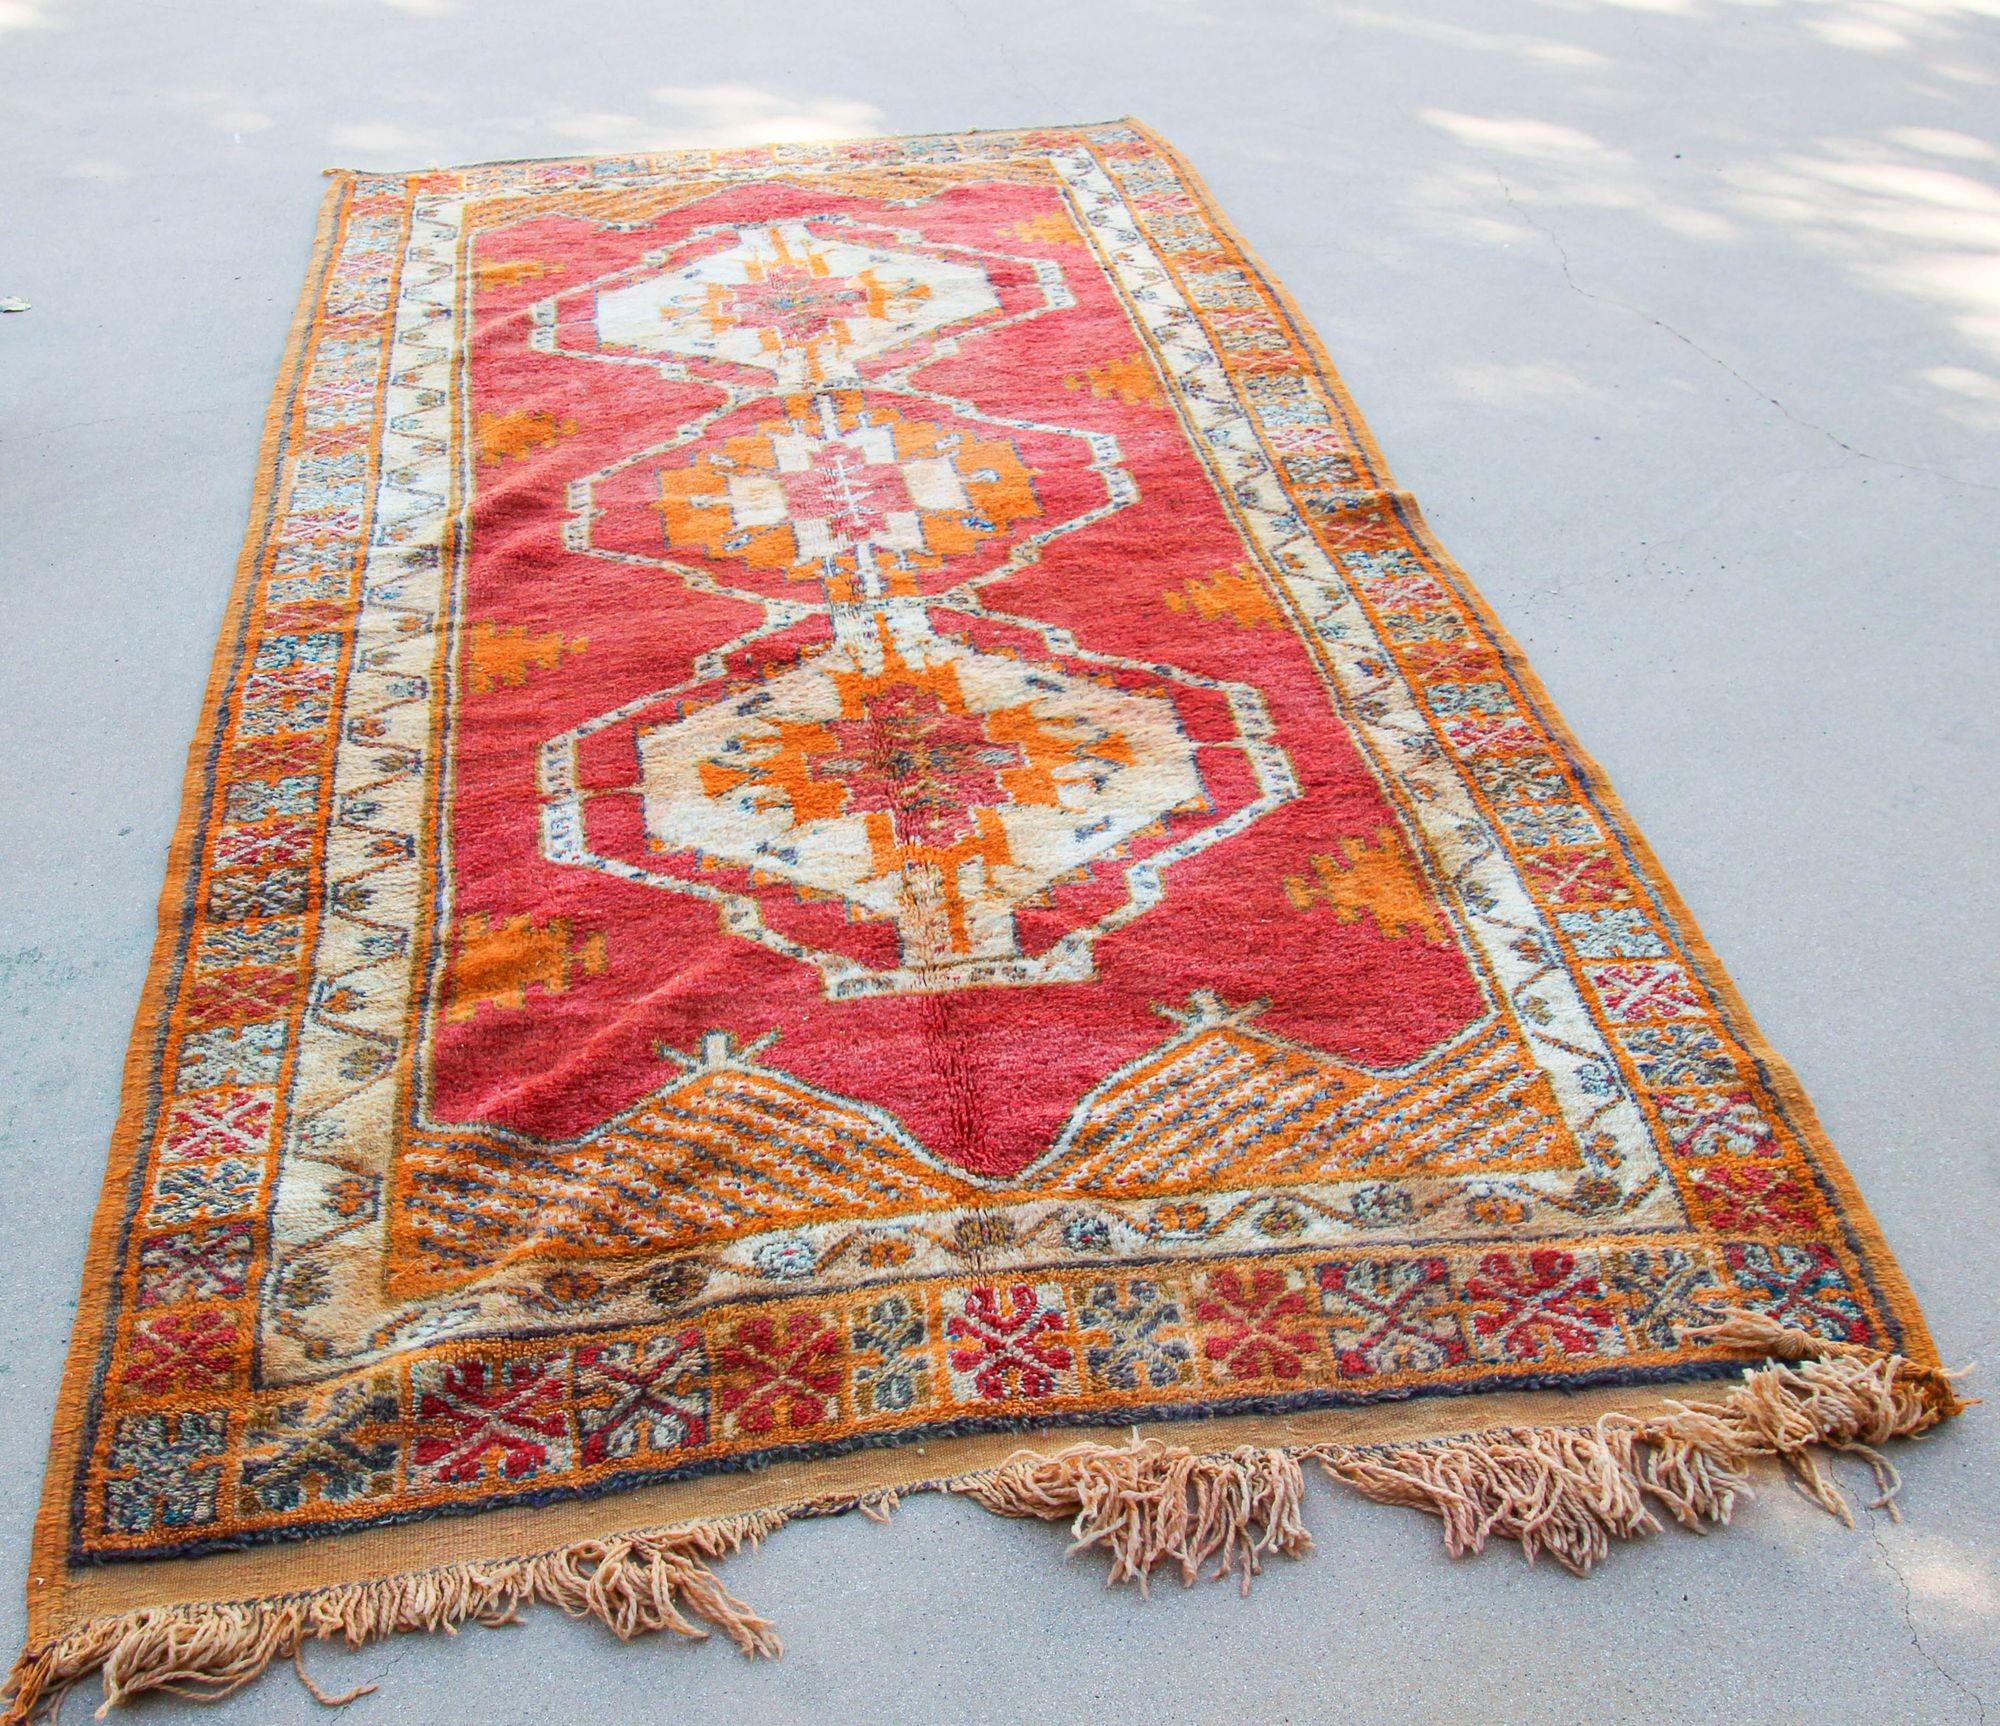 1960s Moroccan authentic Berber rug, burnt orange cors.For centuries the tribal people of Morocco's Atlas Mountains have passed down the delicate art of rug-weaving. In Northern Africa rugs are not only a practical asset to the home, they are an